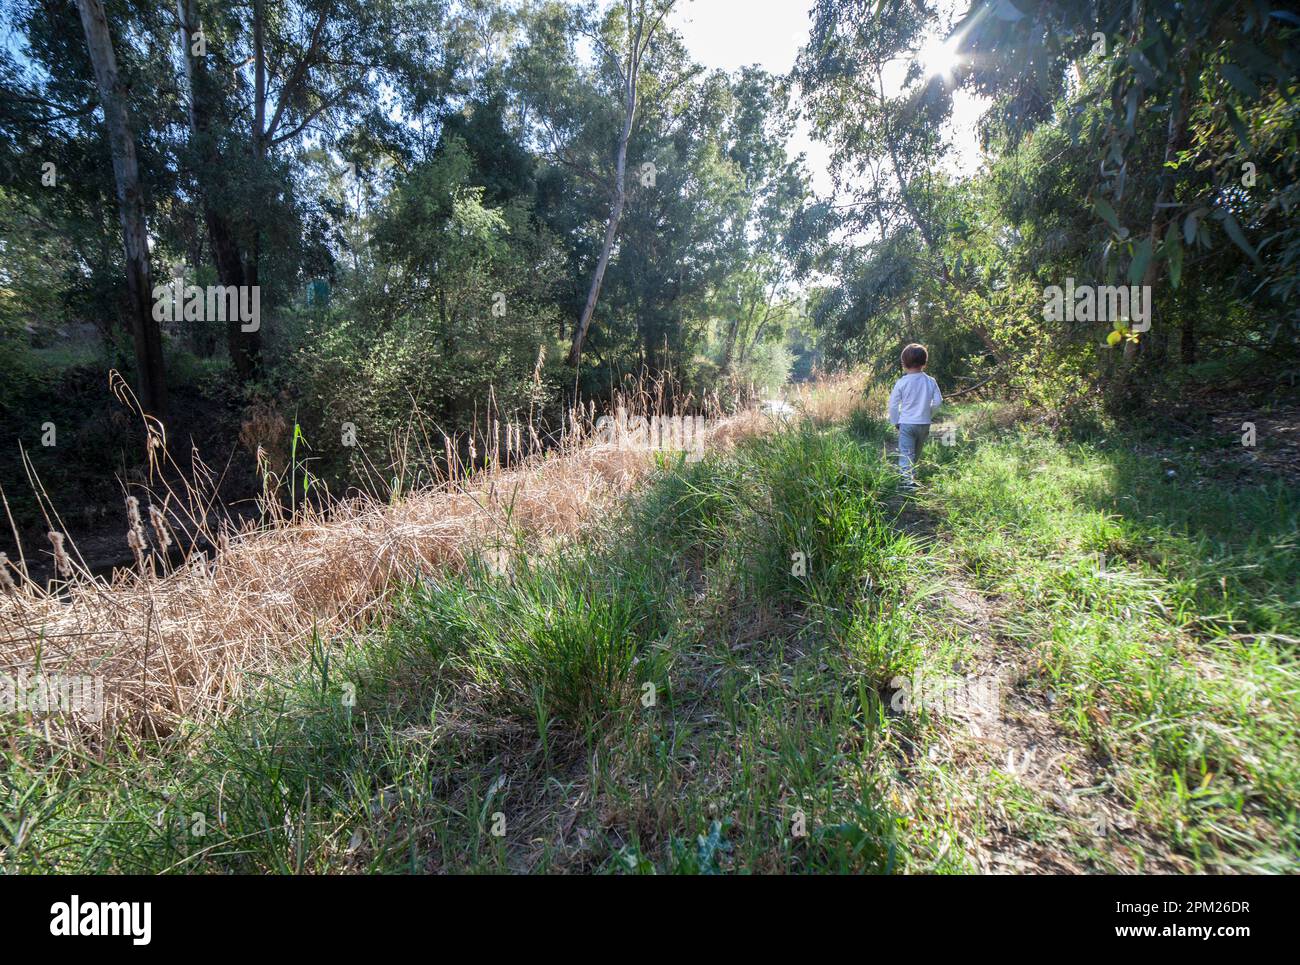 Boy walking alone through a eucalyptus forest. Children discovering nature alone Stock Photo